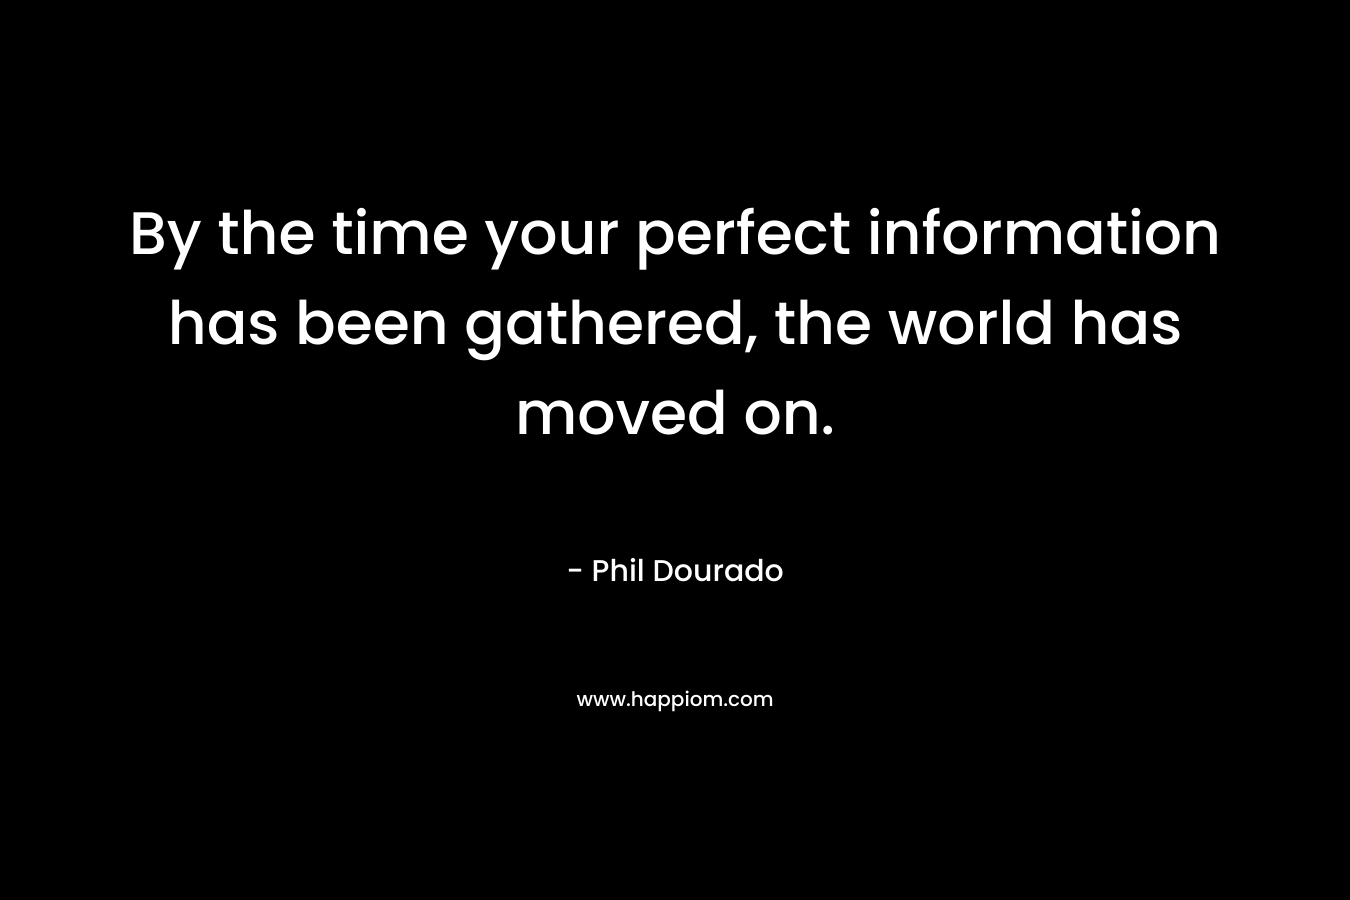 By the time your perfect information has been gathered, the world has moved on. – Phil Dourado